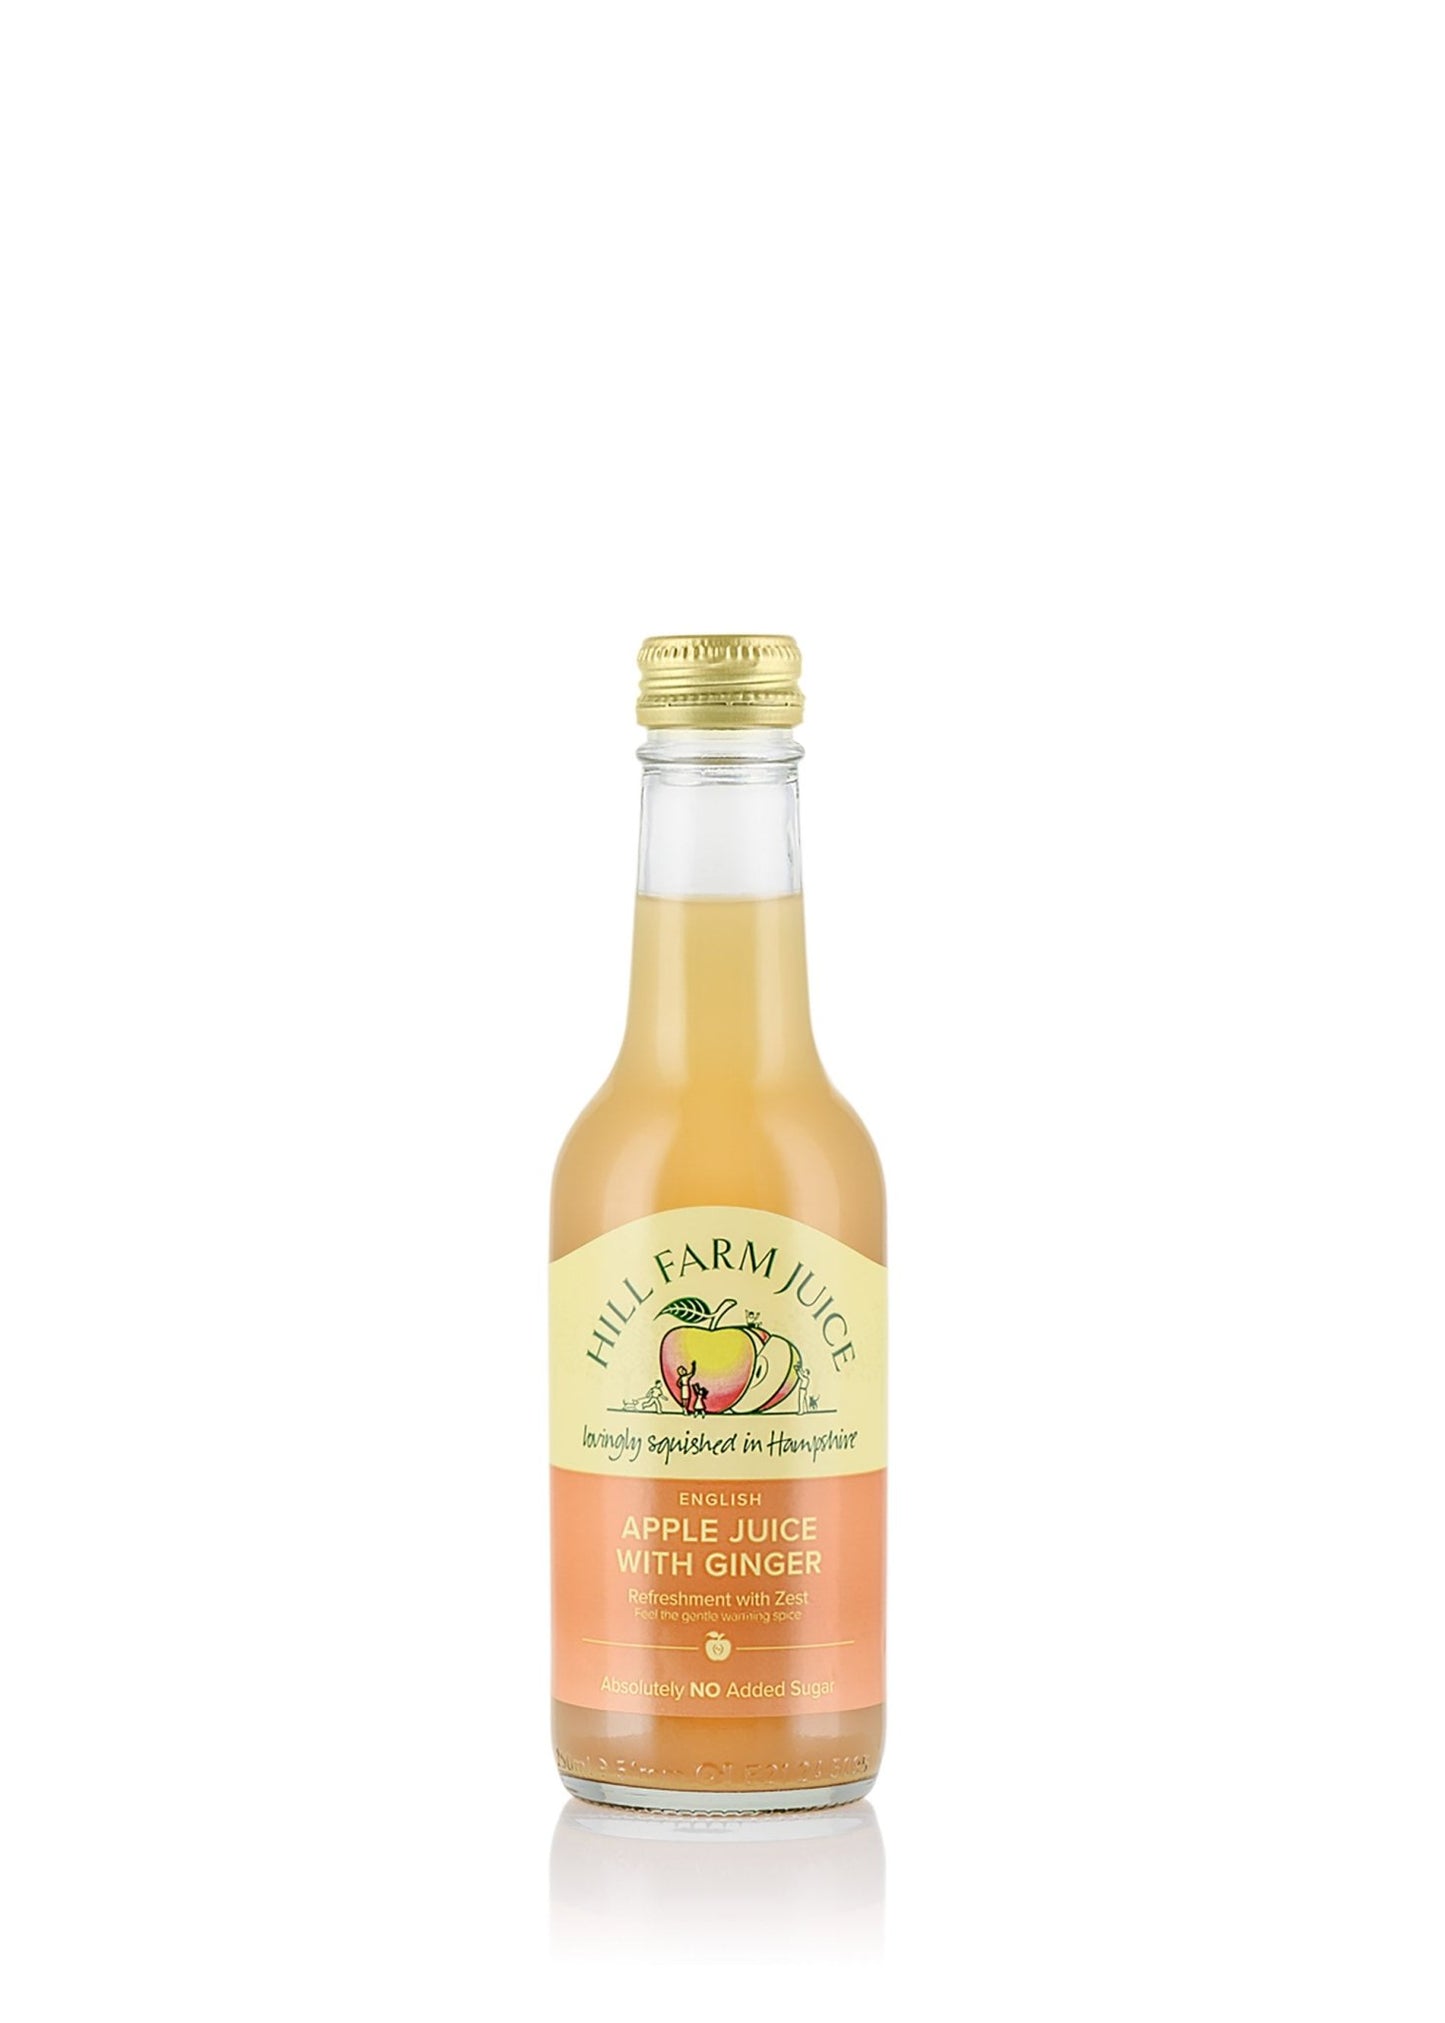 Apple Juice with Ginger - Hill Farm Juice